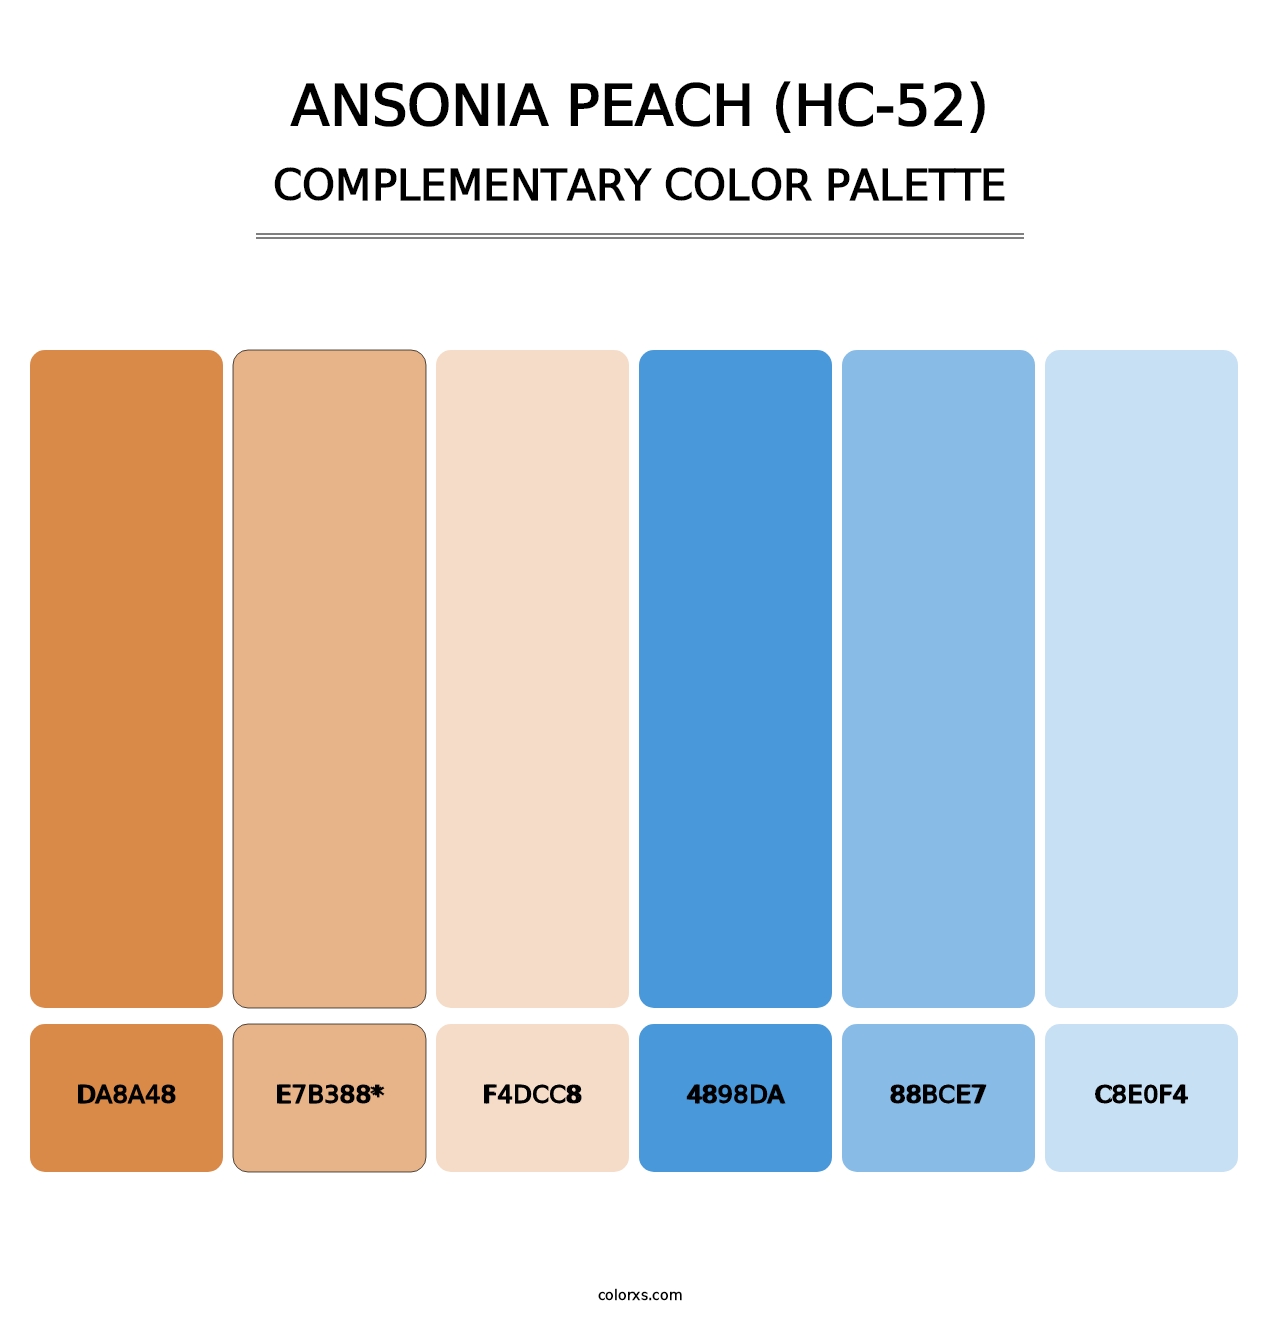 Ansonia Peach (HC-52) - Complementary Color Palette